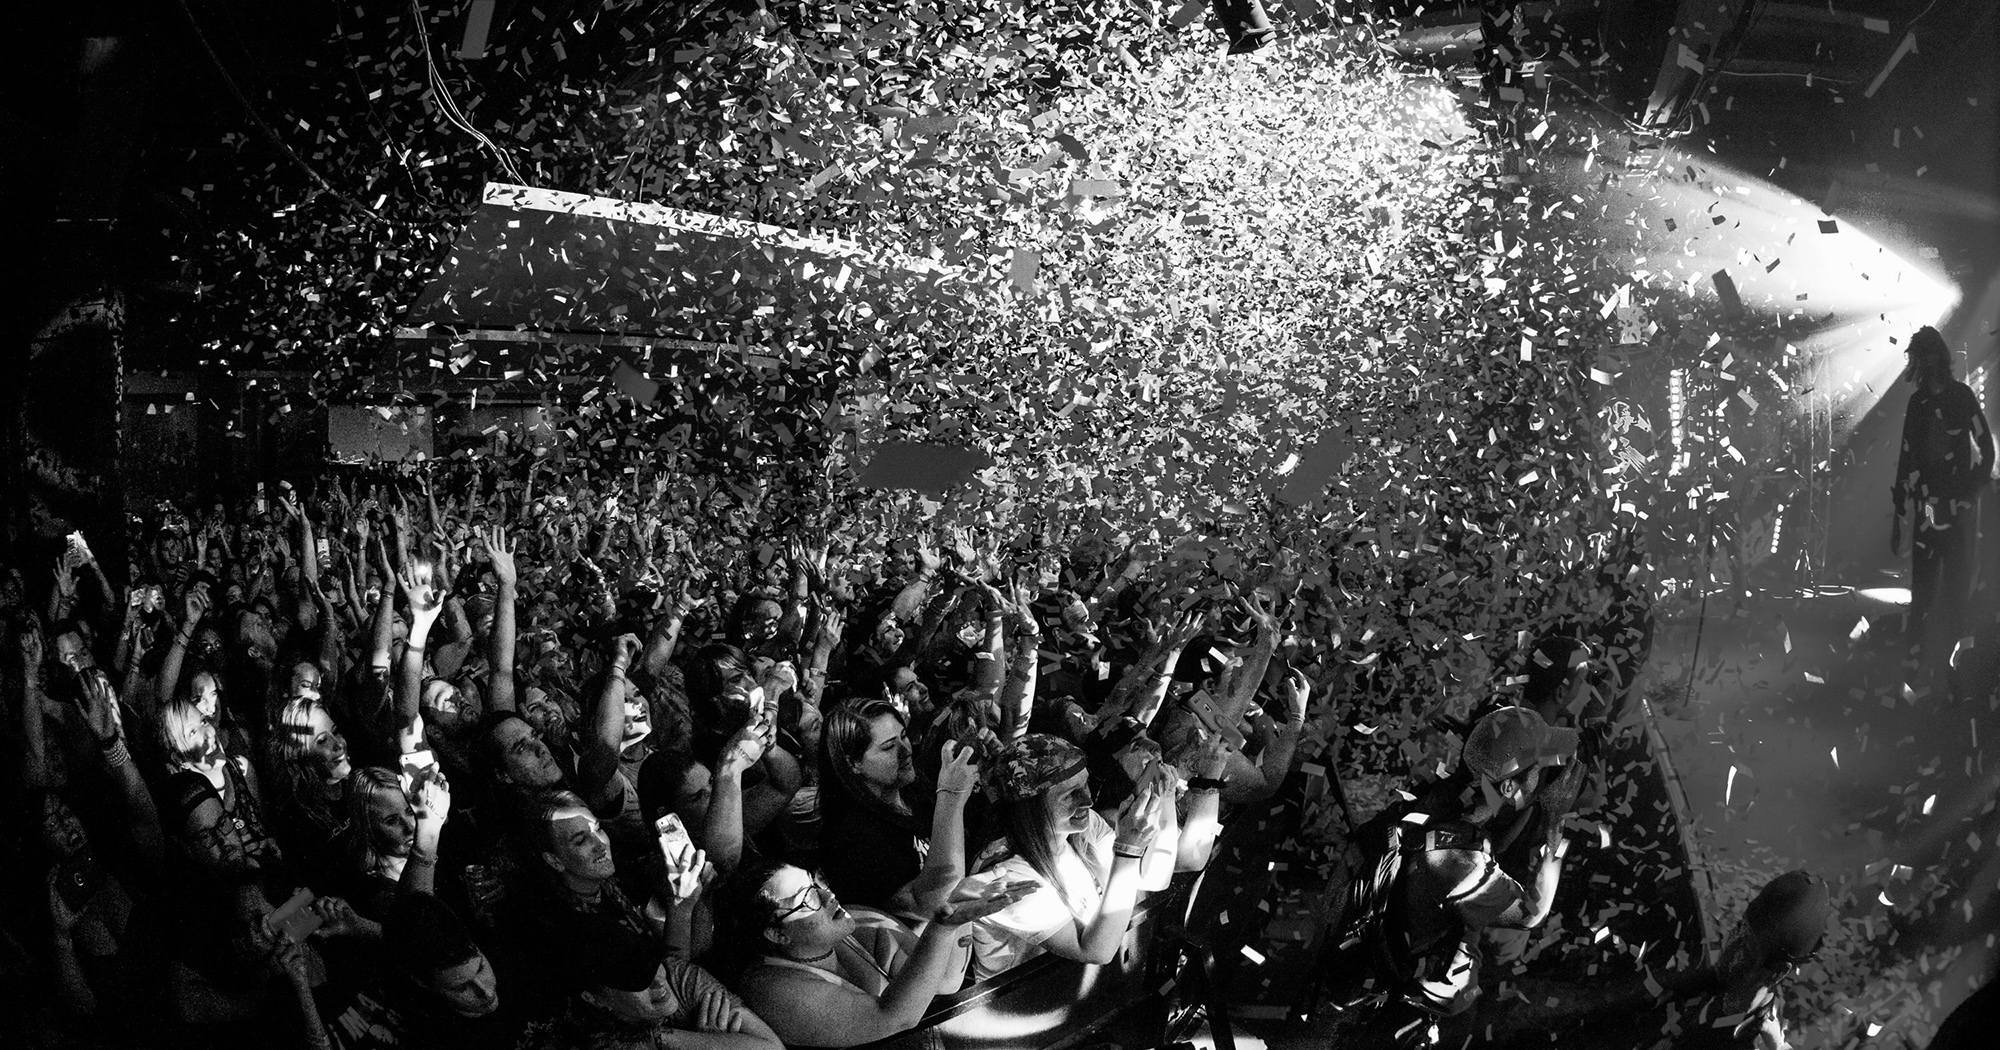 Musical event with confetti raining down on the crowd.